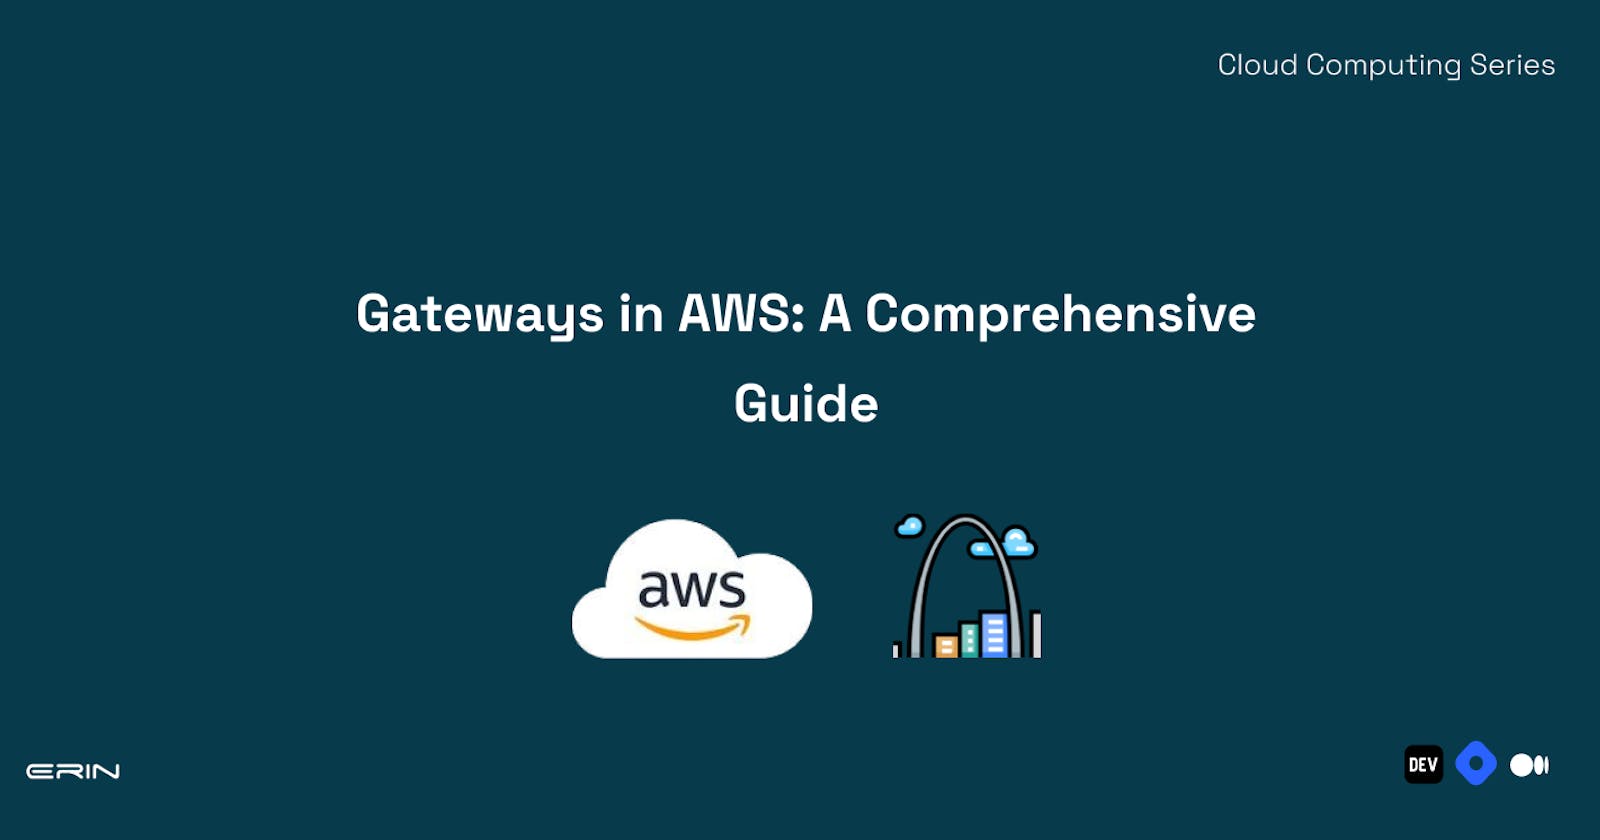 Gateways in AWS: A Comprehensive Guide